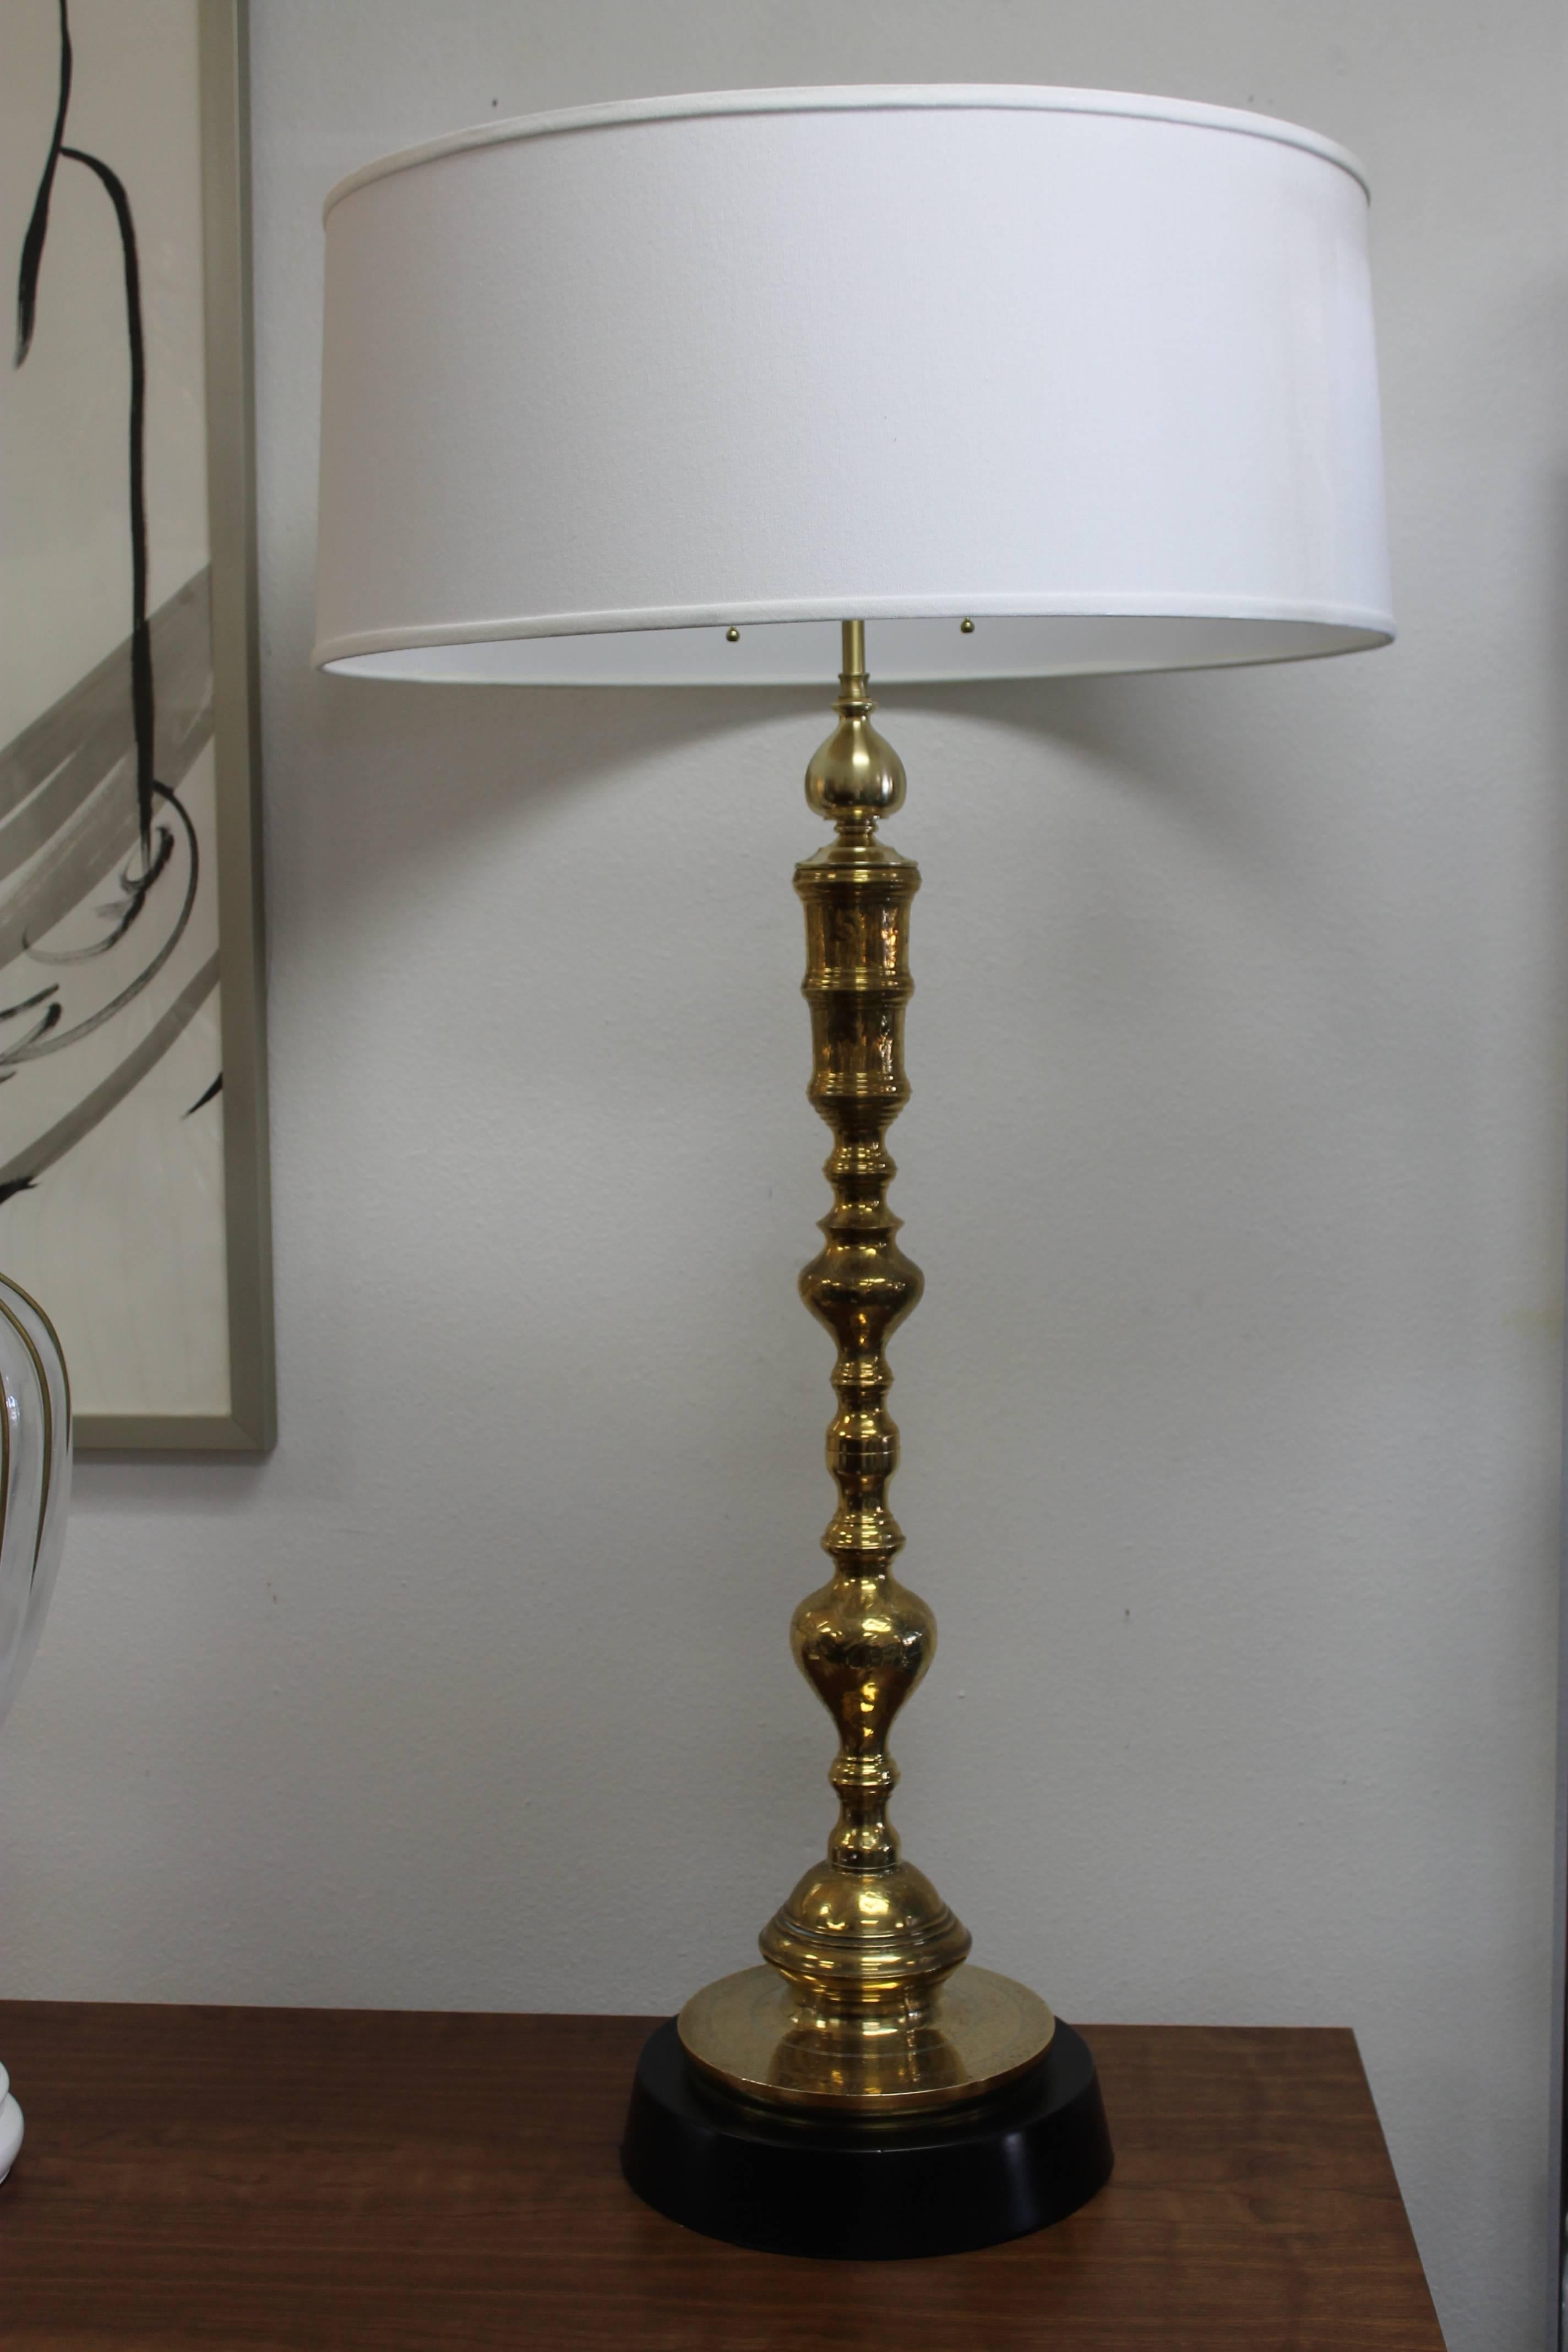 Monumental pair of custom designed Moroccan lamps. We took a pair of brass candlesticks and modified them to produce an elegant pair of brass lamps. Base has a switch so that you can either turn on/off the lamps. Base is 11